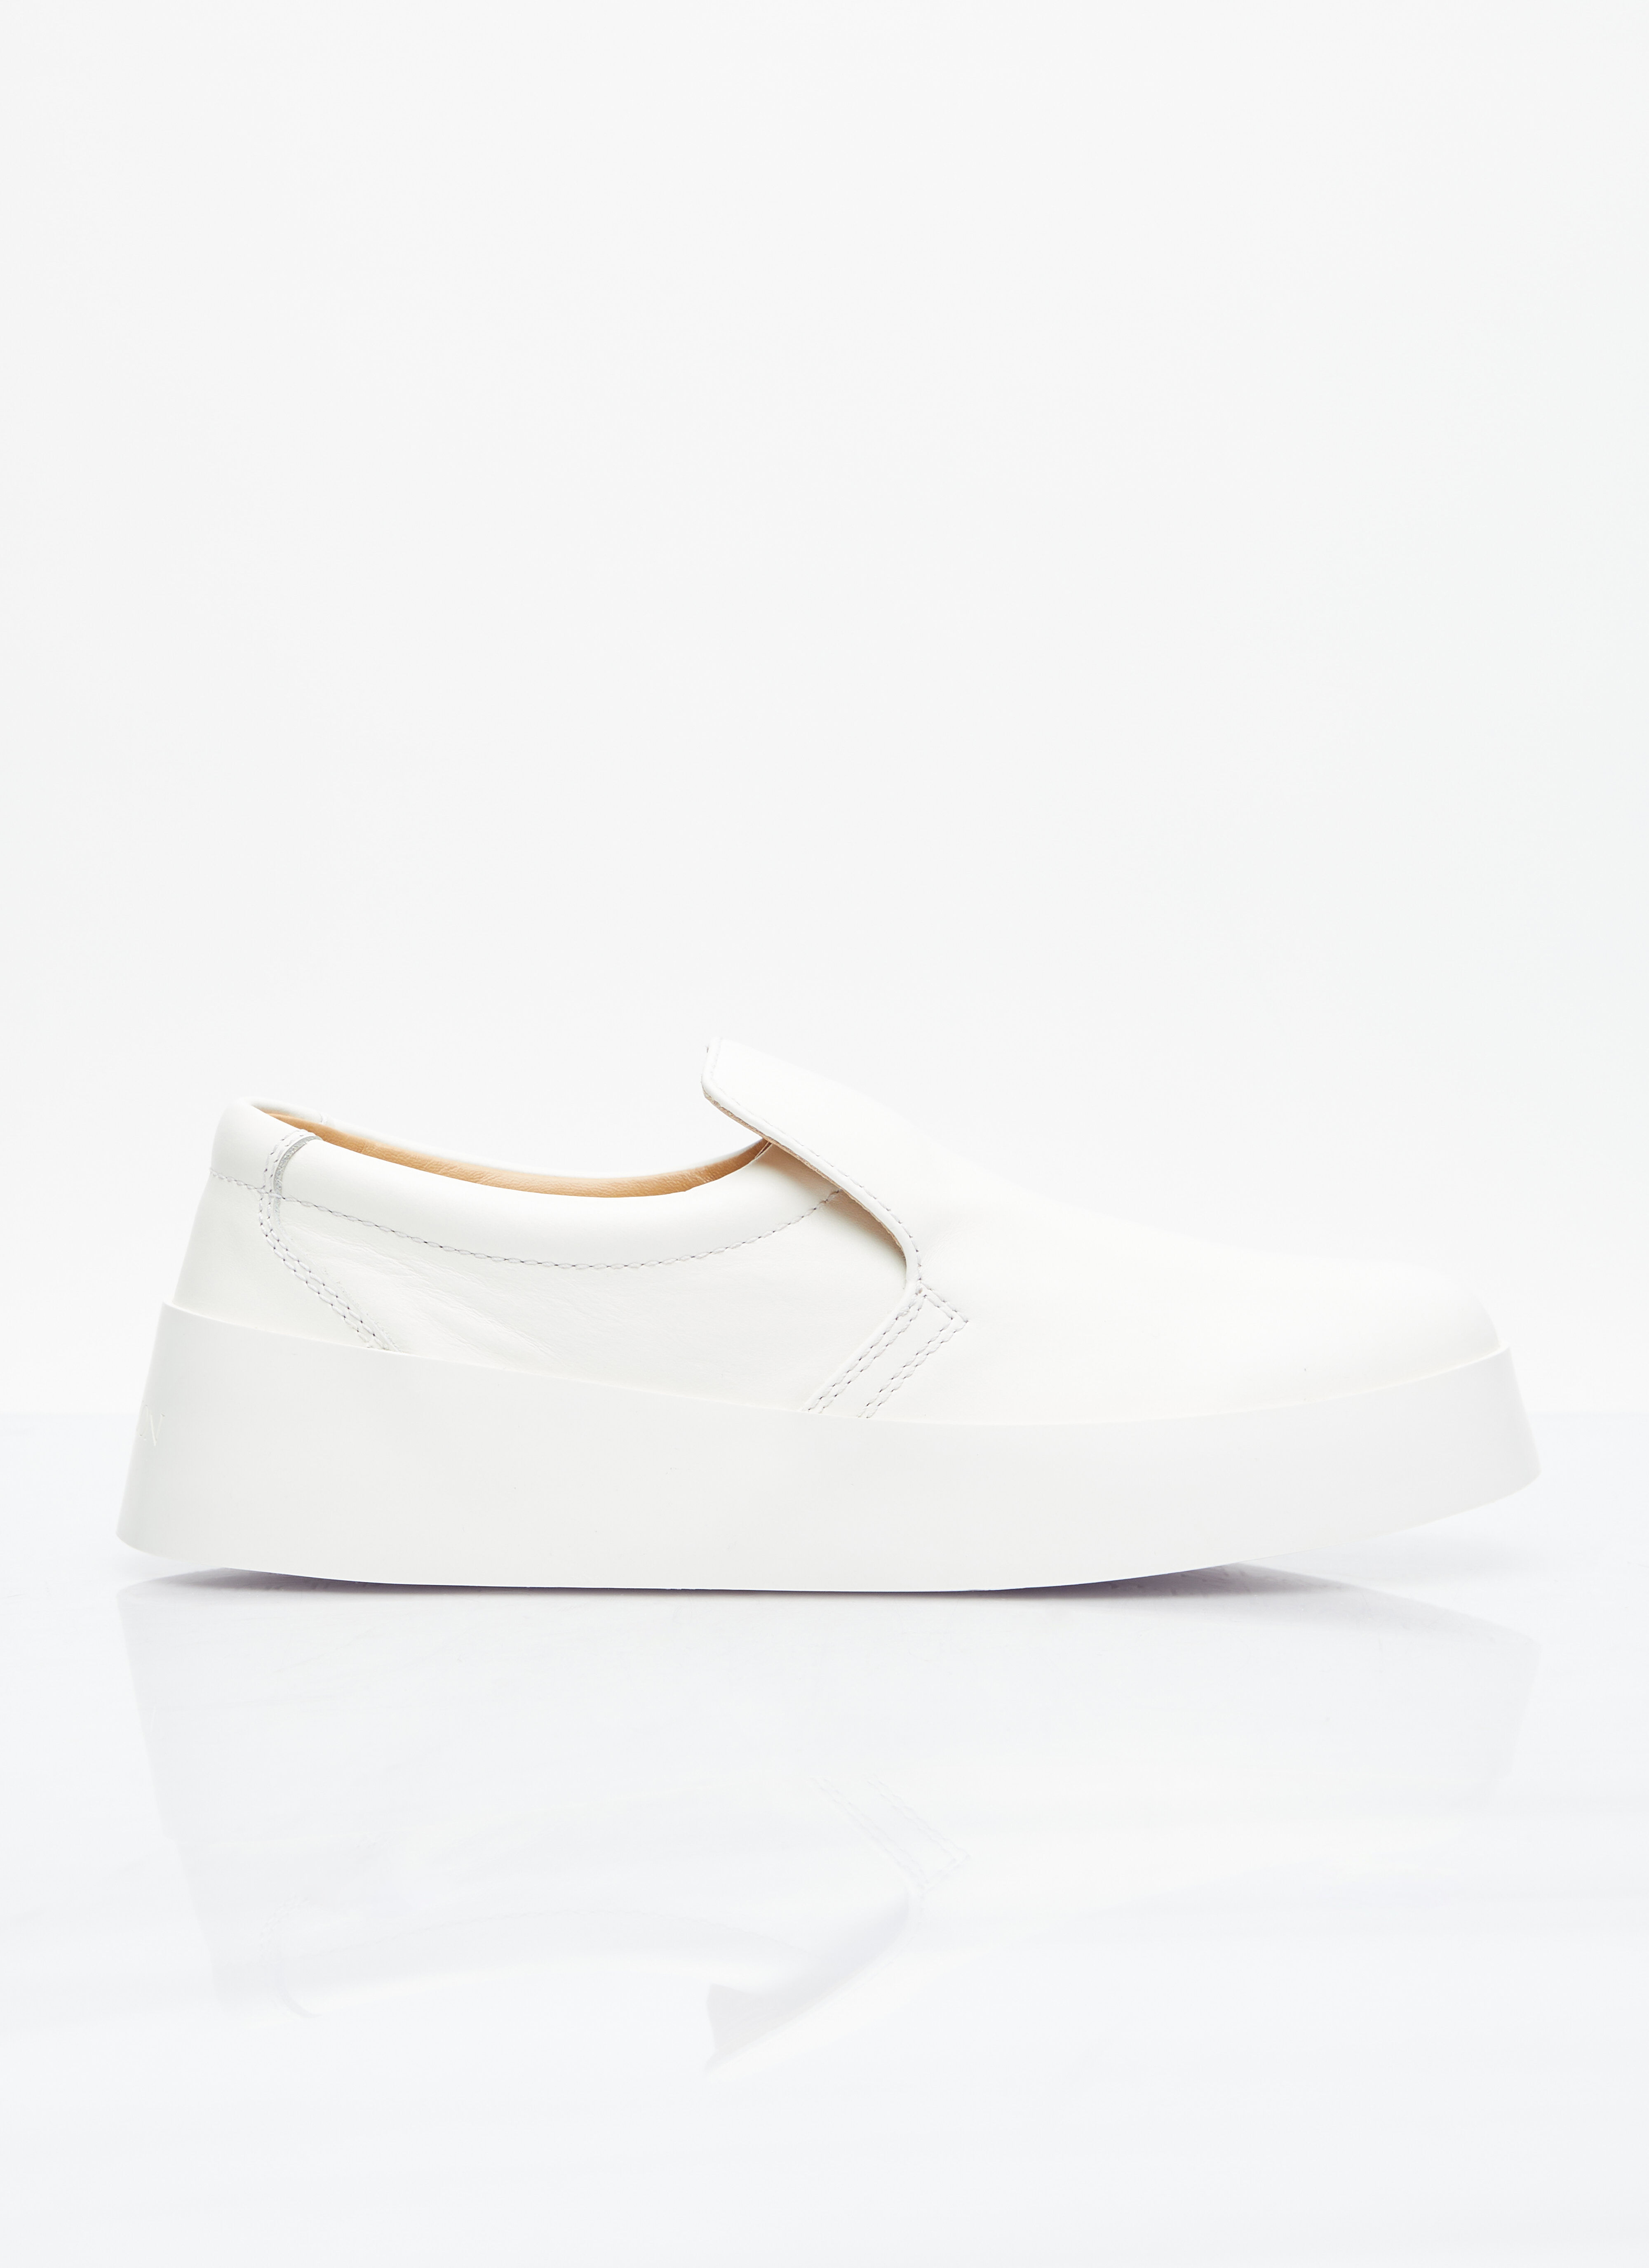 JW Anderson Leather Slip-On Sneakers White jwa0255010